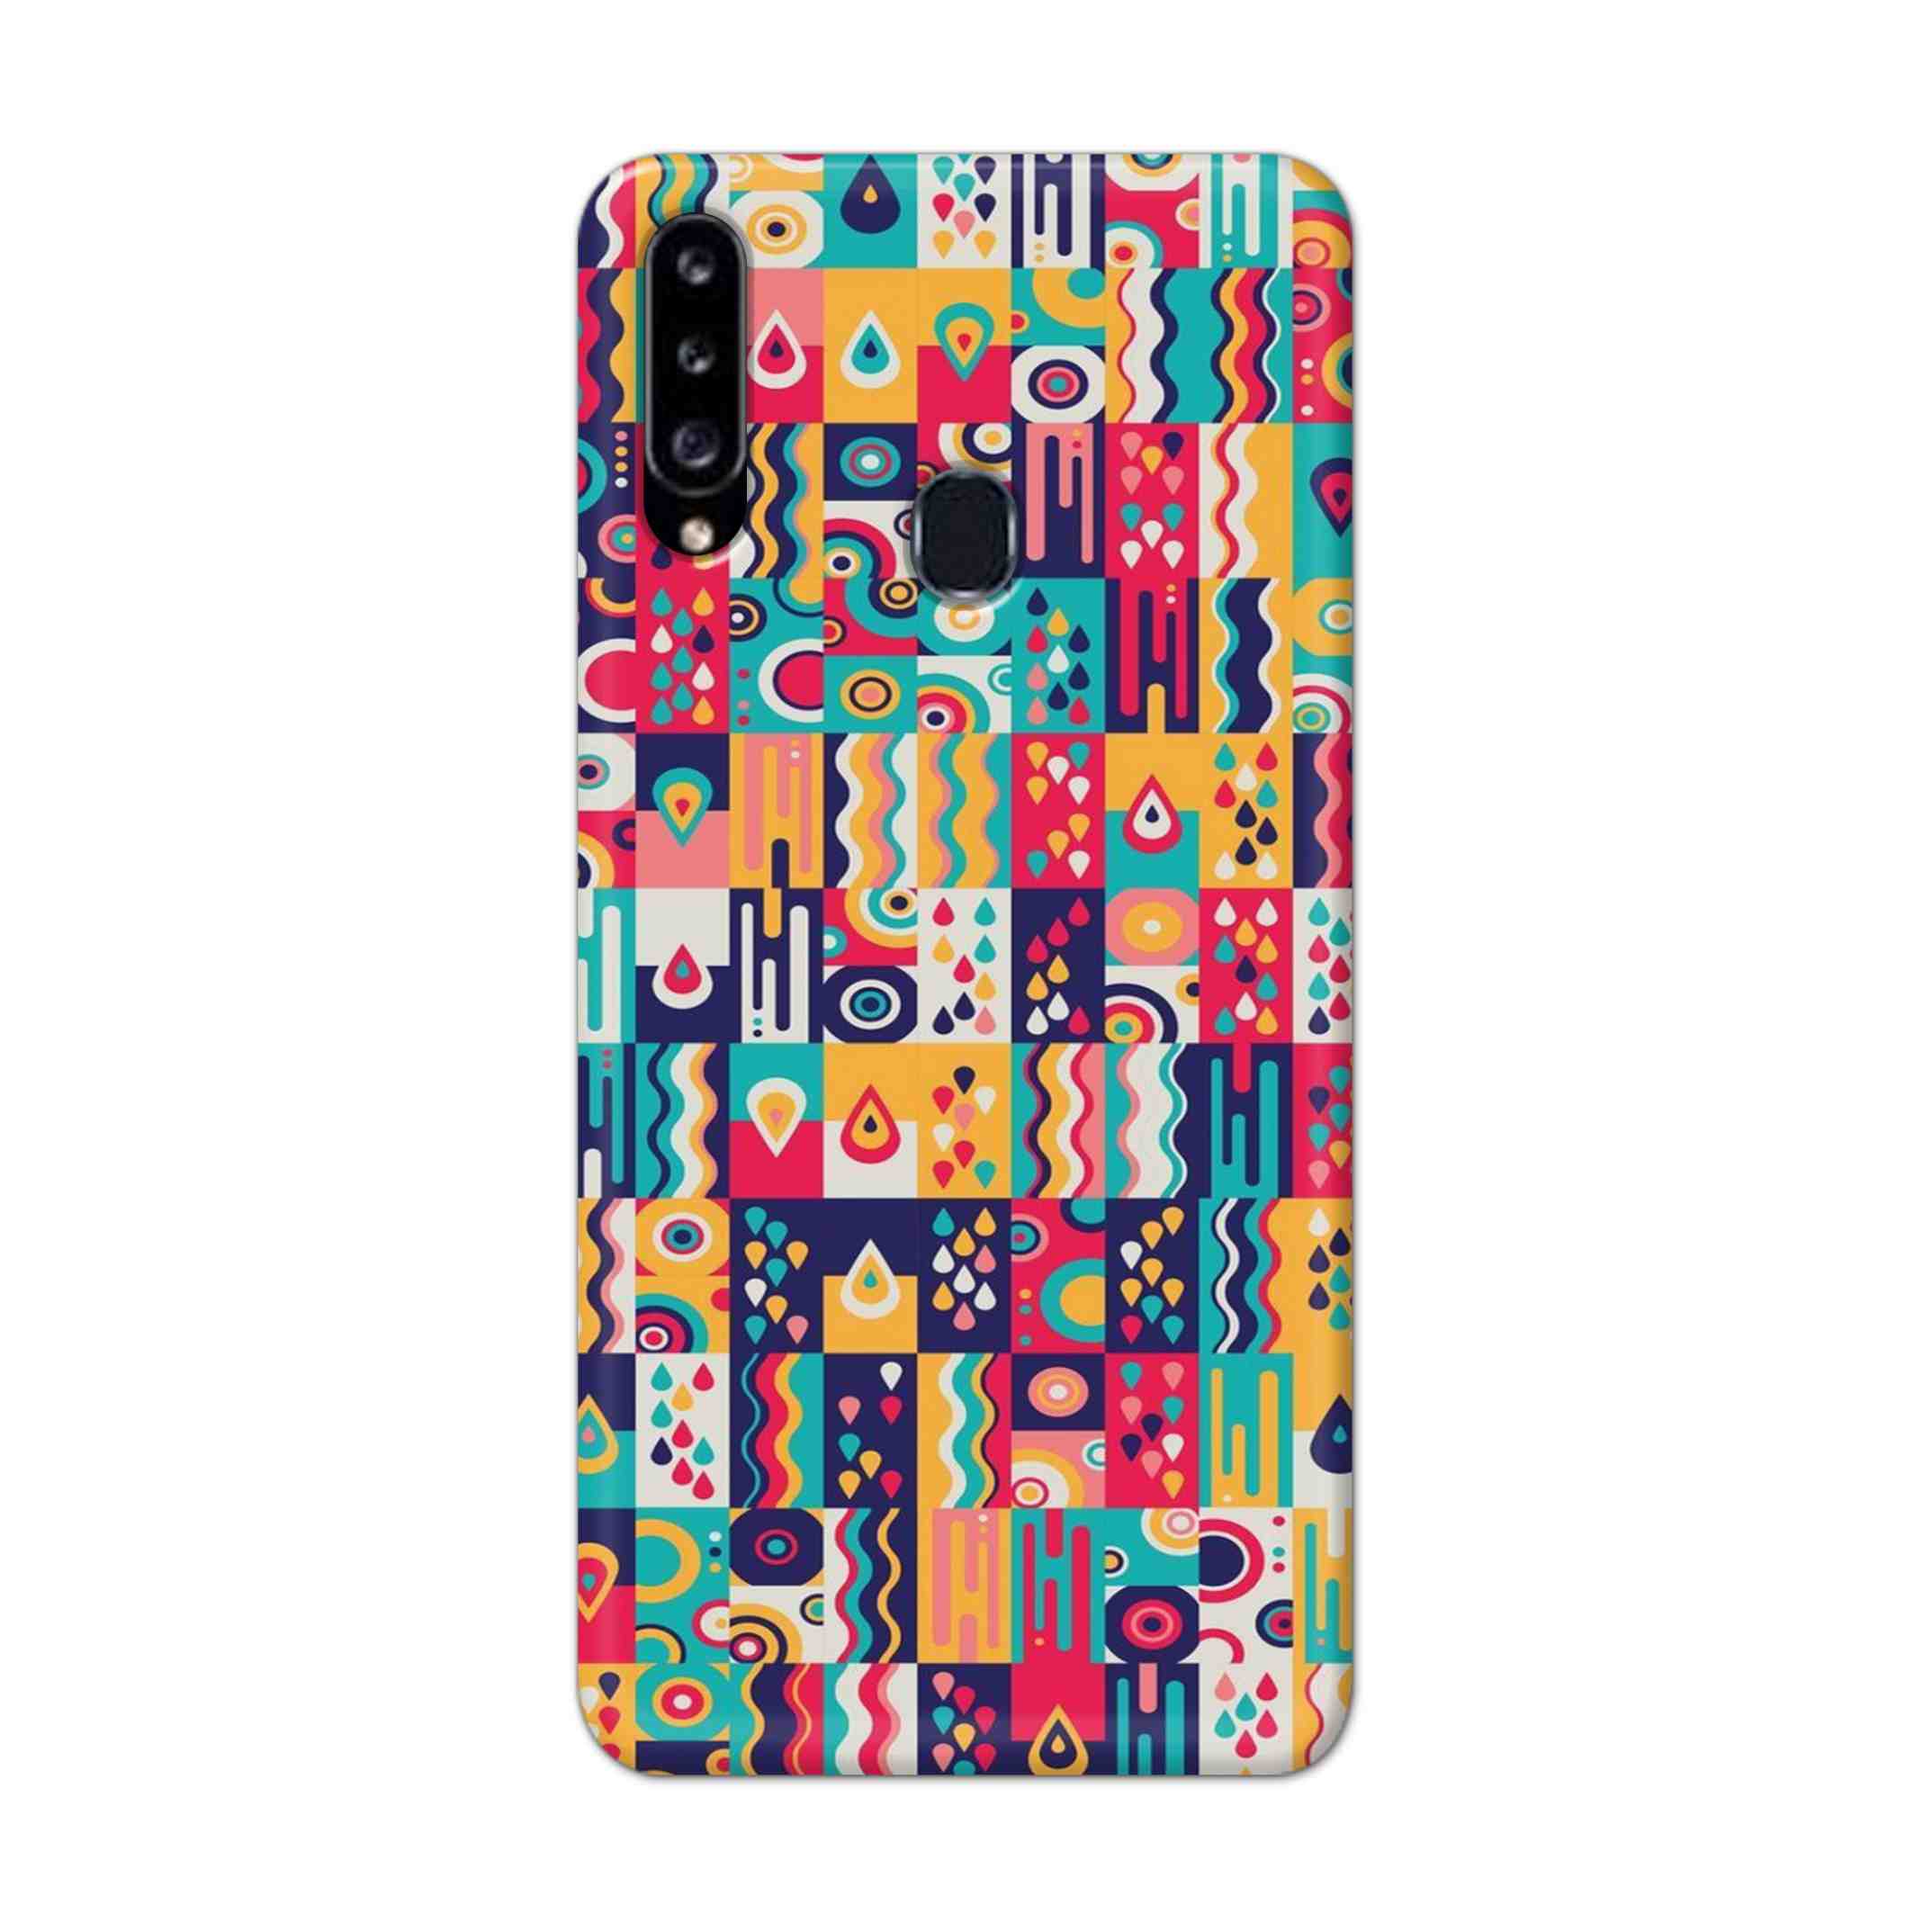 Buy Art Hard Back Mobile Phone Case Cover For Samsung Galaxy A21 Online